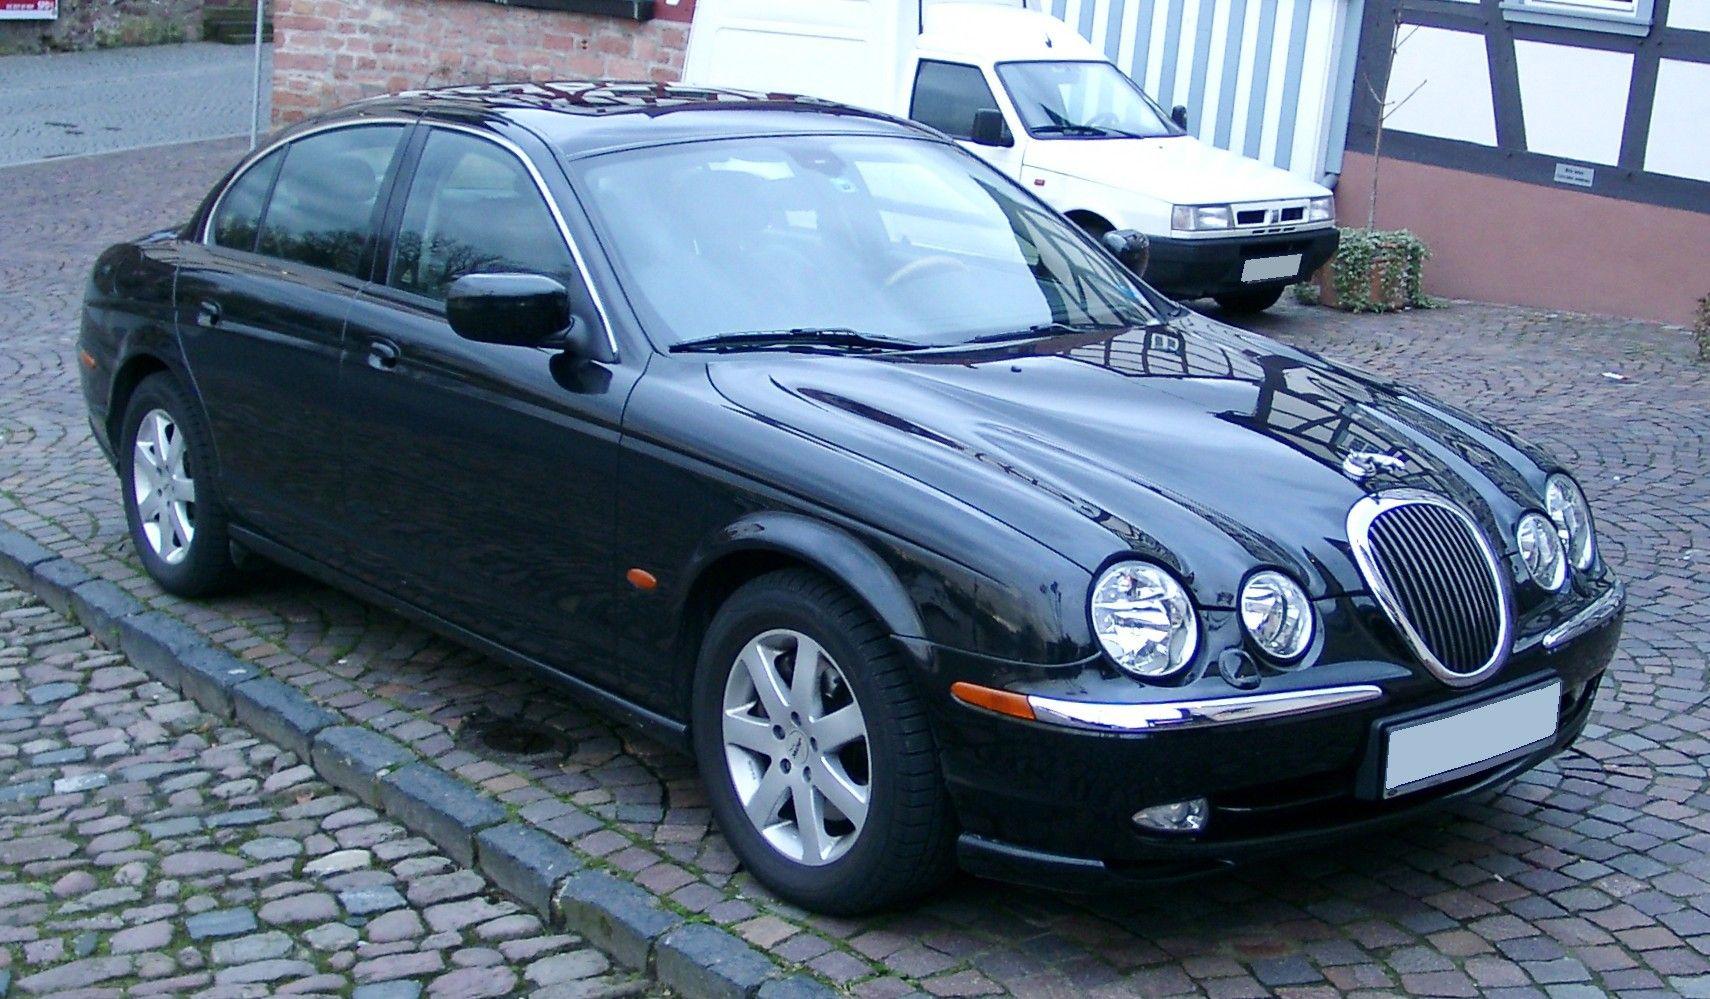 Jaguar S Type. These Toys Aren't Just For Boys. Cars